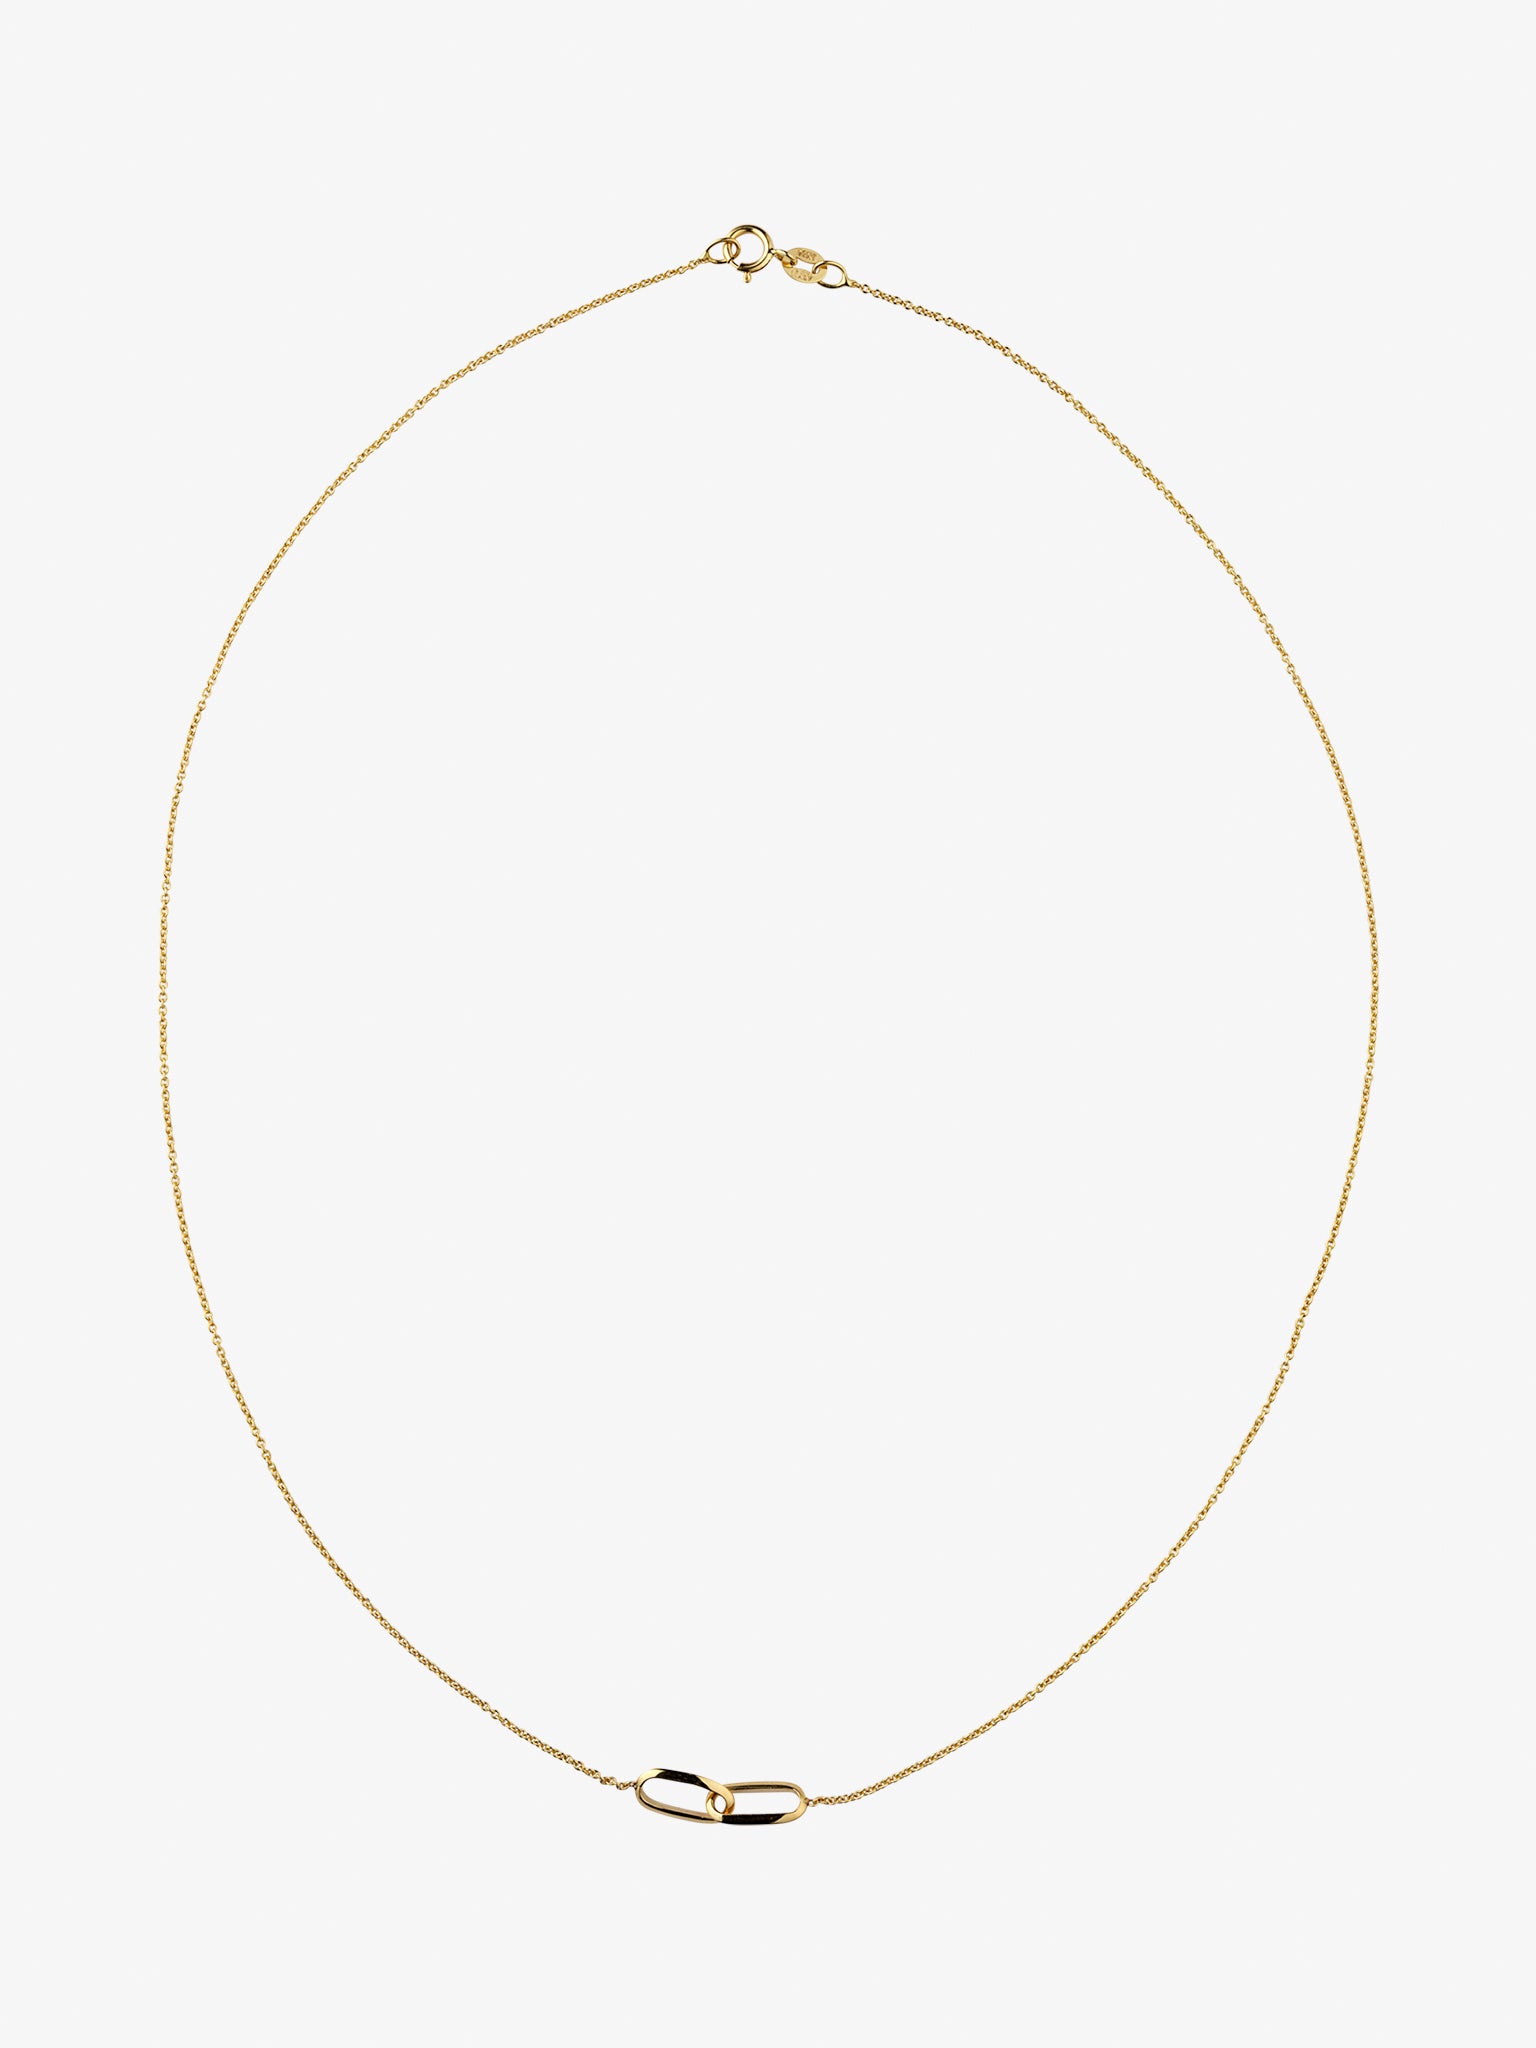 Linked necklace